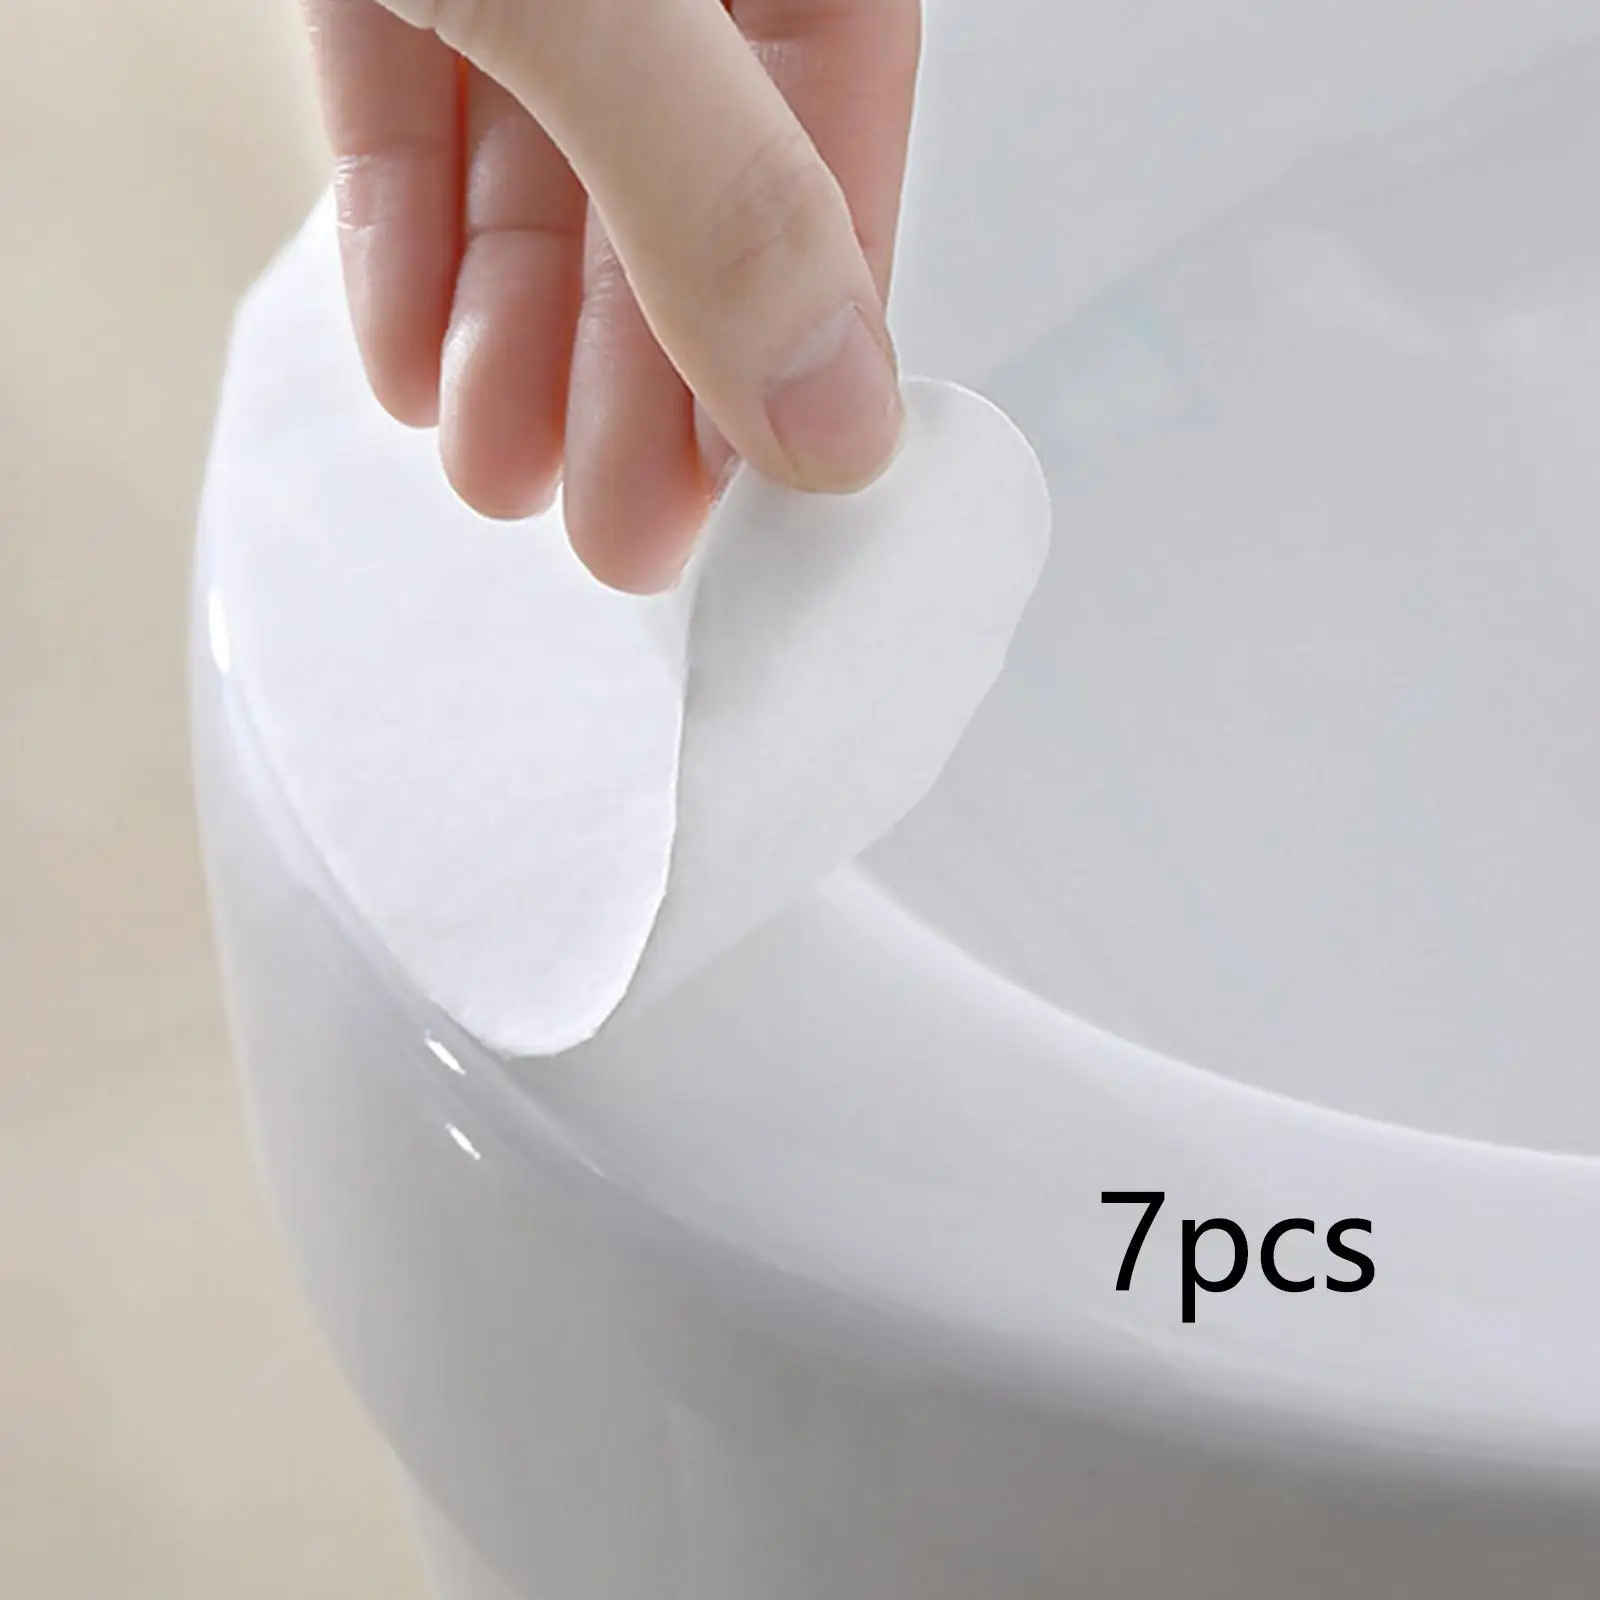 Toilet Pad Comfortable Bathroom Accessories Potty Pad Urine Pad Pad for Traveling Home Use Kids